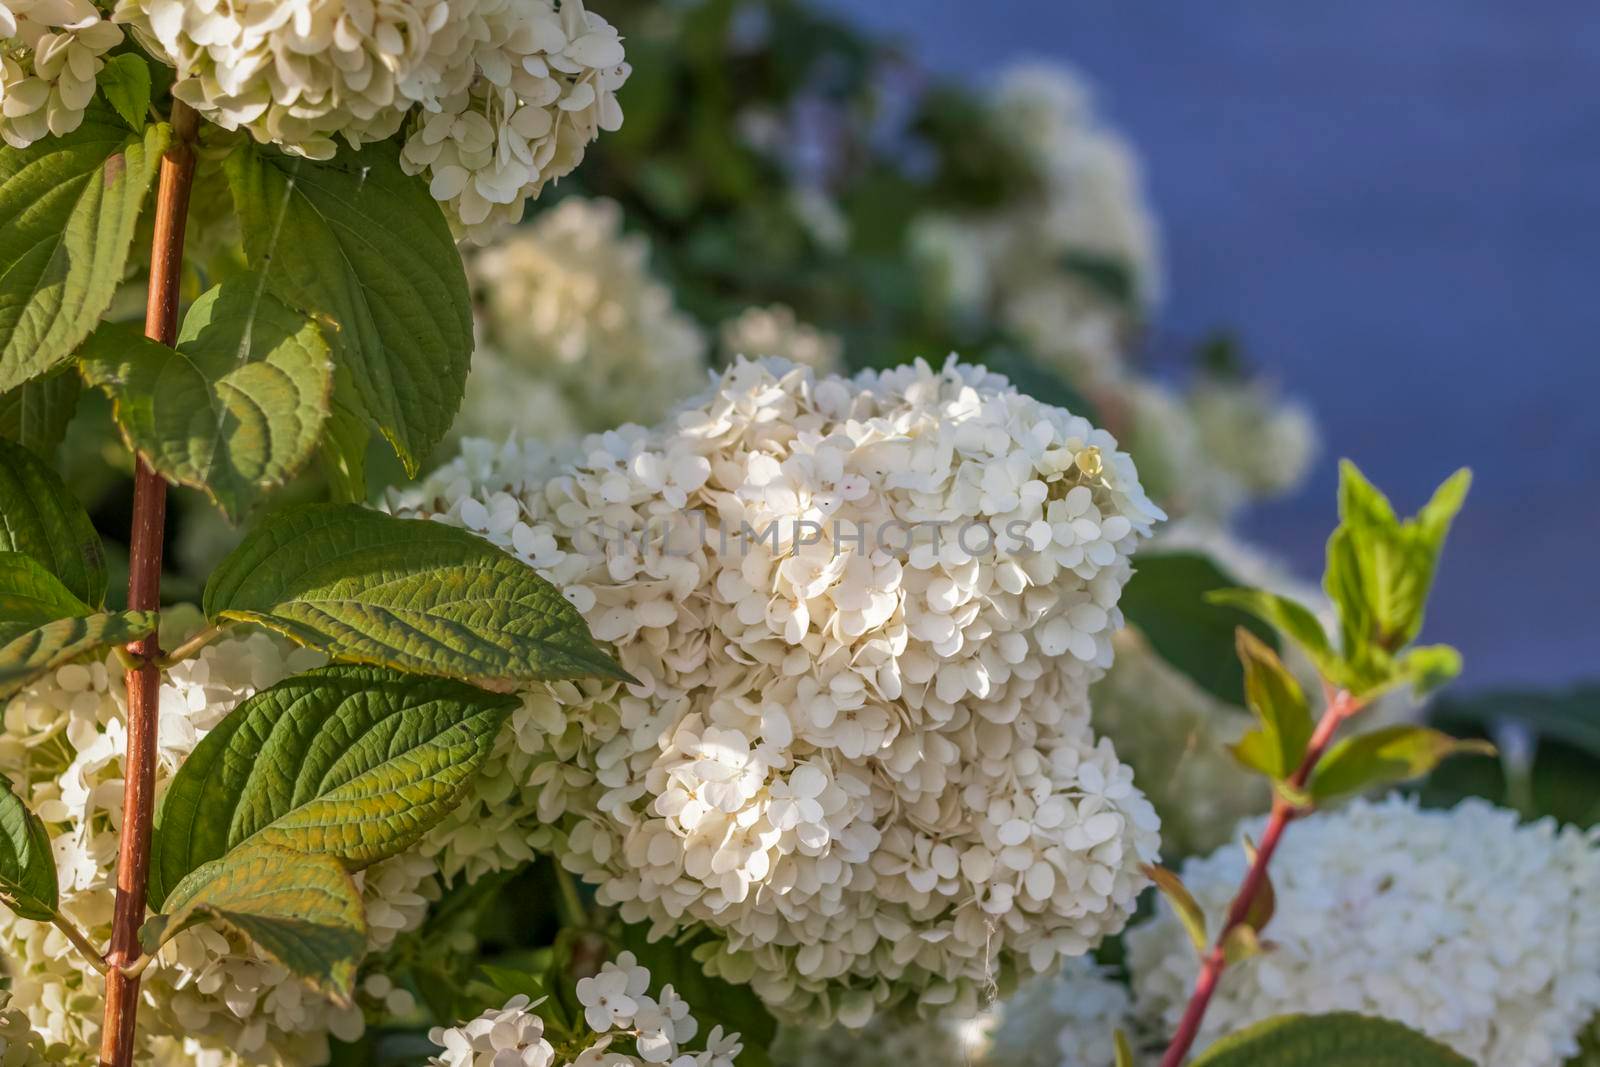 Hydrangea in the garden in a flowerbed under the open sky. Lush delightful huge inflorescence of white and pink hydrangeas in the garden.